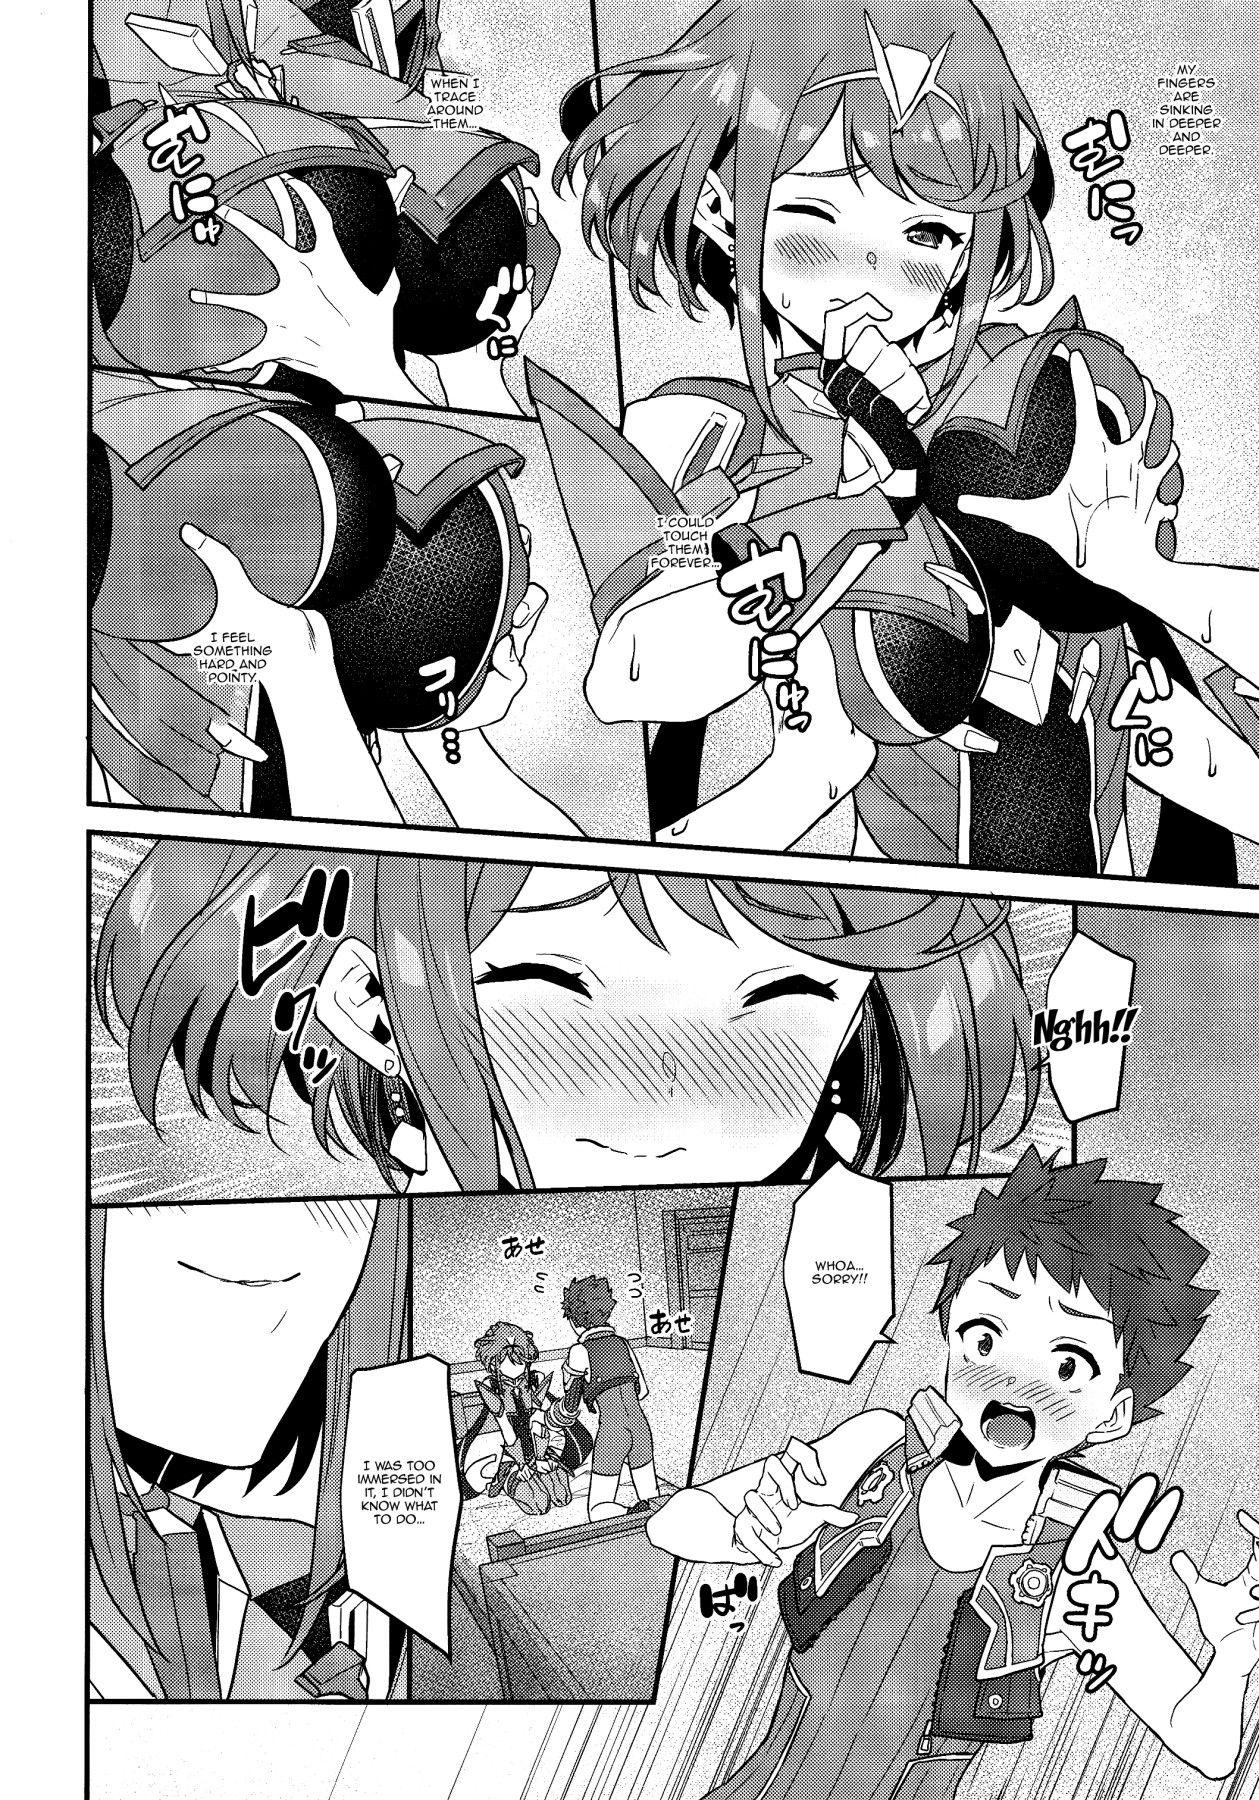 Chacal Chouyou no Naka e to | In The Morning Light - Xenoblade chronicles 2 Freak - Page 11